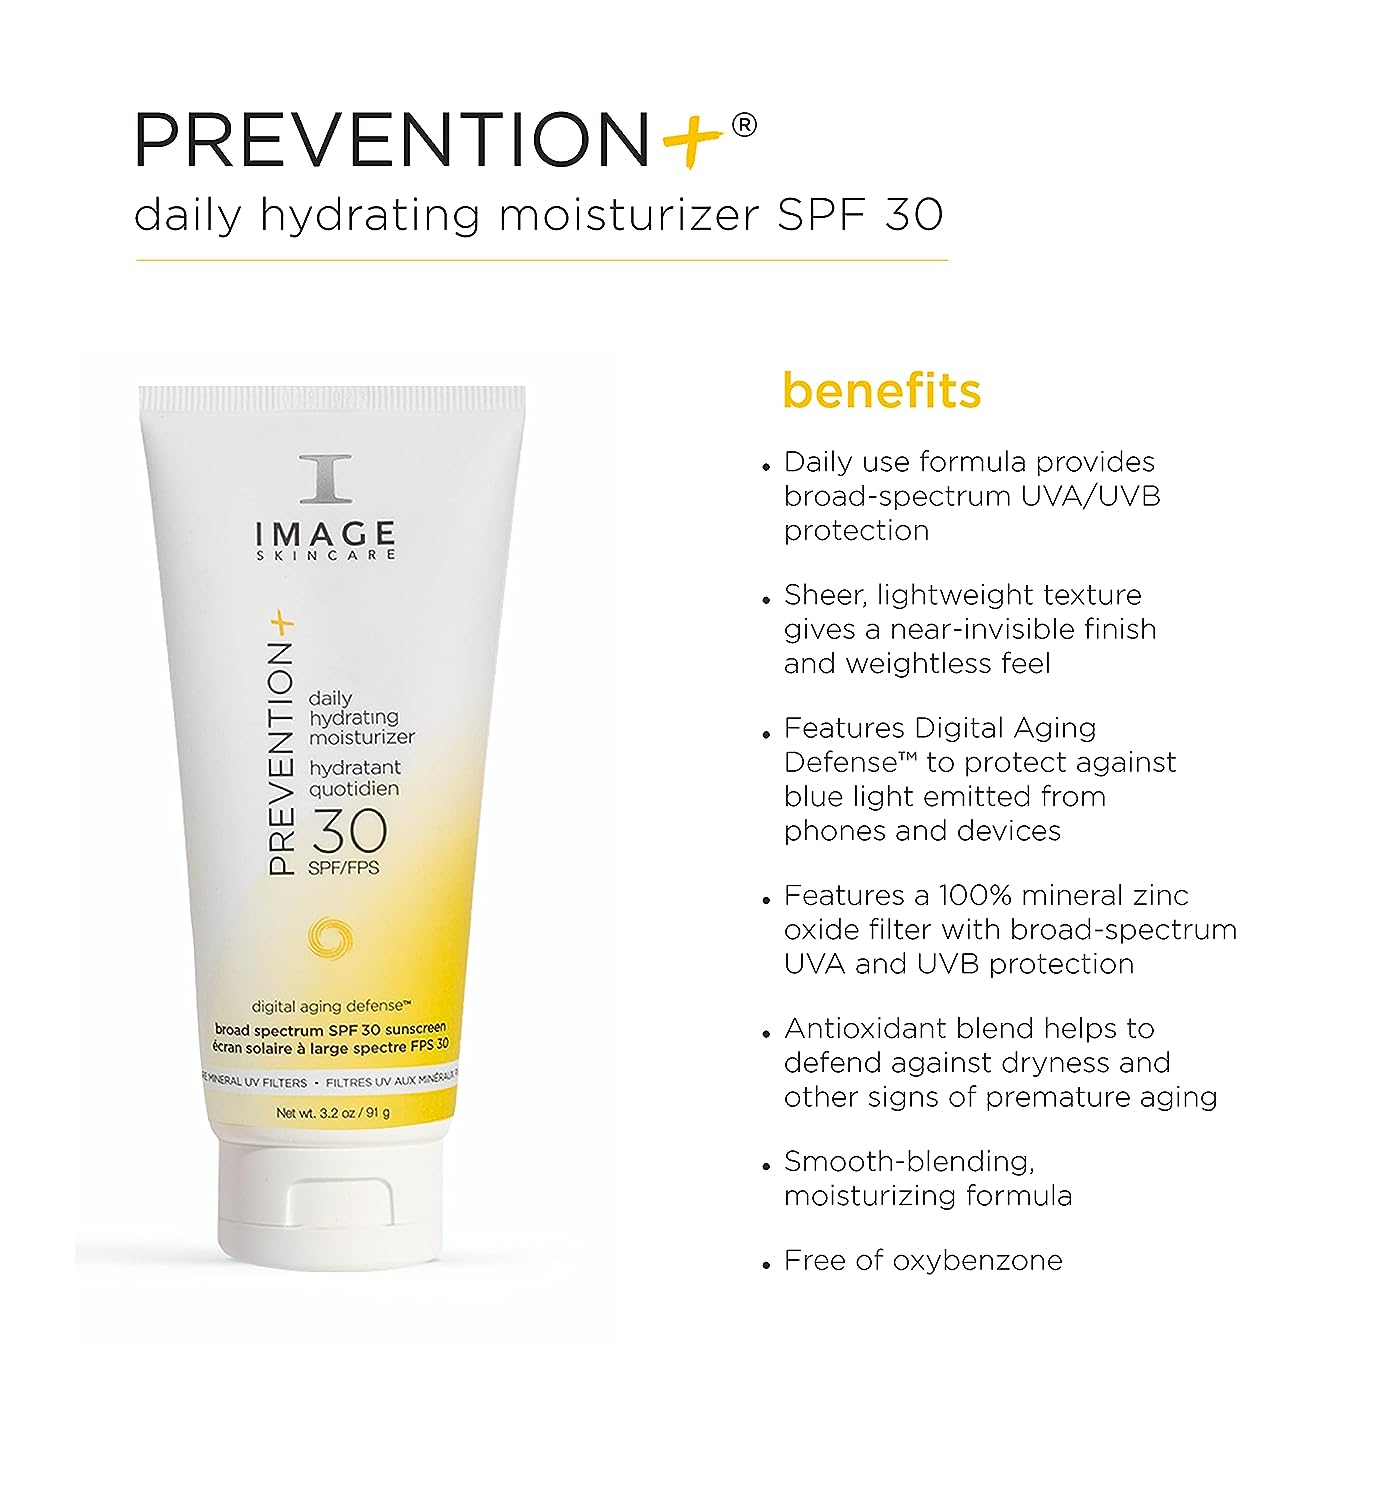 Image Skincare Prevention Daily Hydrating Moisturizer + Aging Defence Broad Spectrum SPF 30, 3.2 oz - image 9 of 9